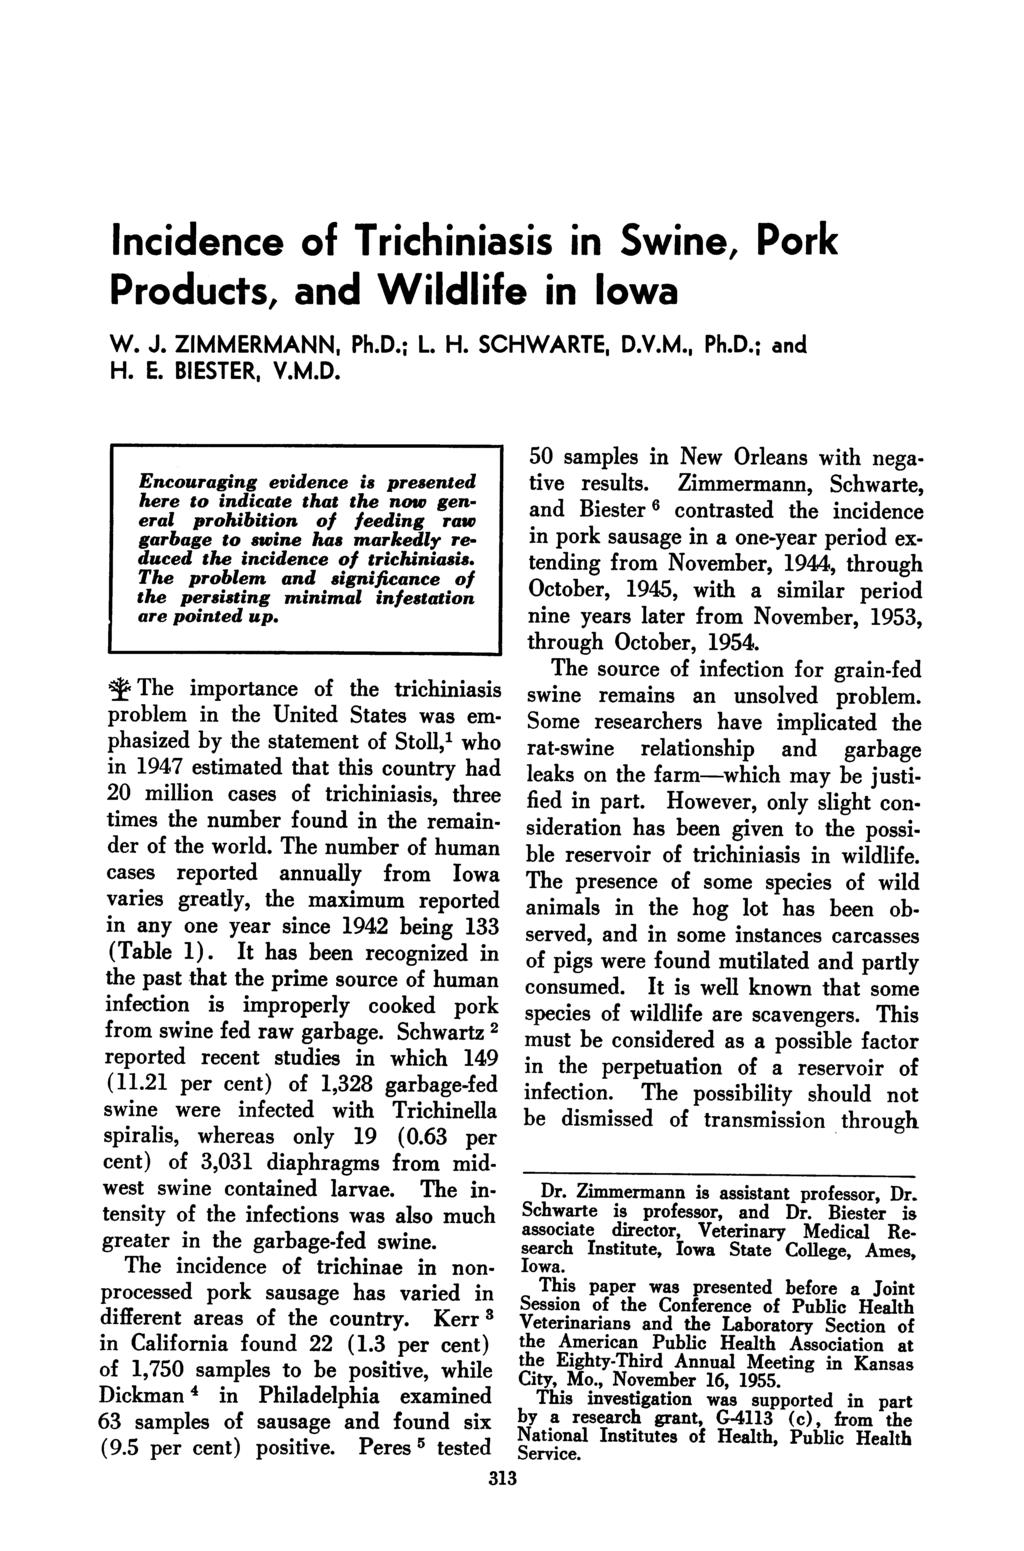 Incidence of Trichiniasis in Products, and Wildlife in Swine, Pork Iowa W. J. ZIMMERMANN, Ph.D.